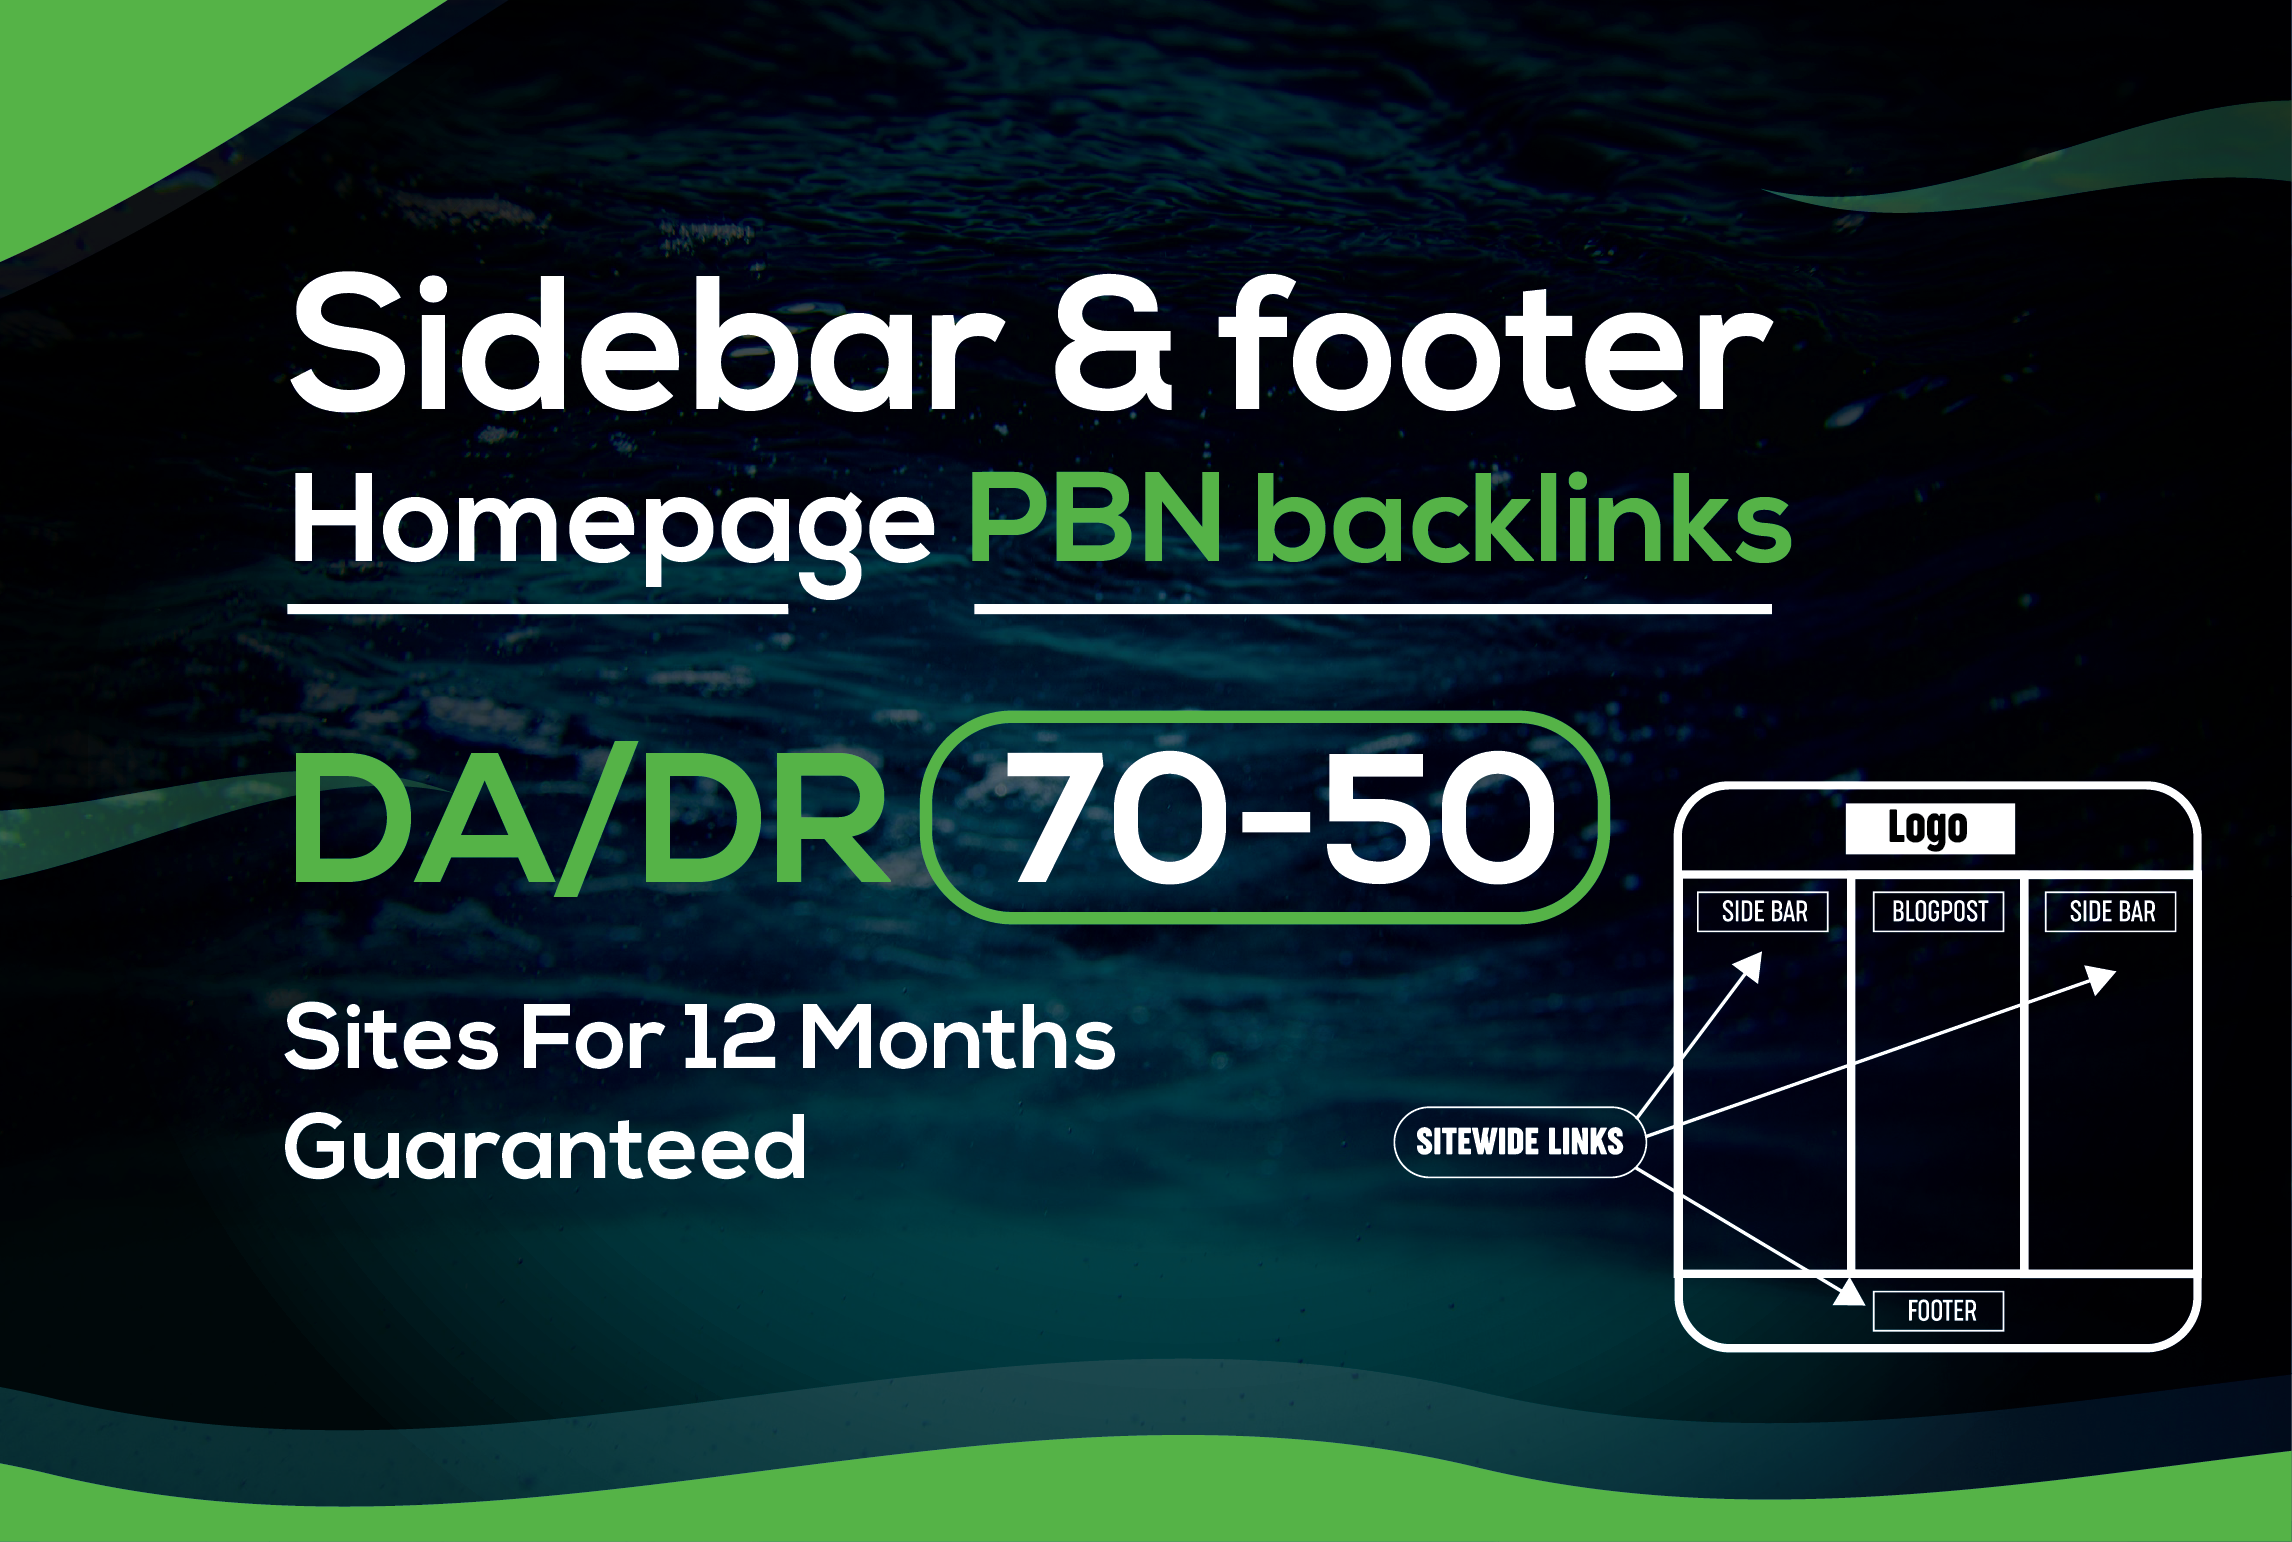  Build 40 Sidebar & footer Homepage PBN backlinks DA/DR 50+ Sites For 6 Months Guaranteed